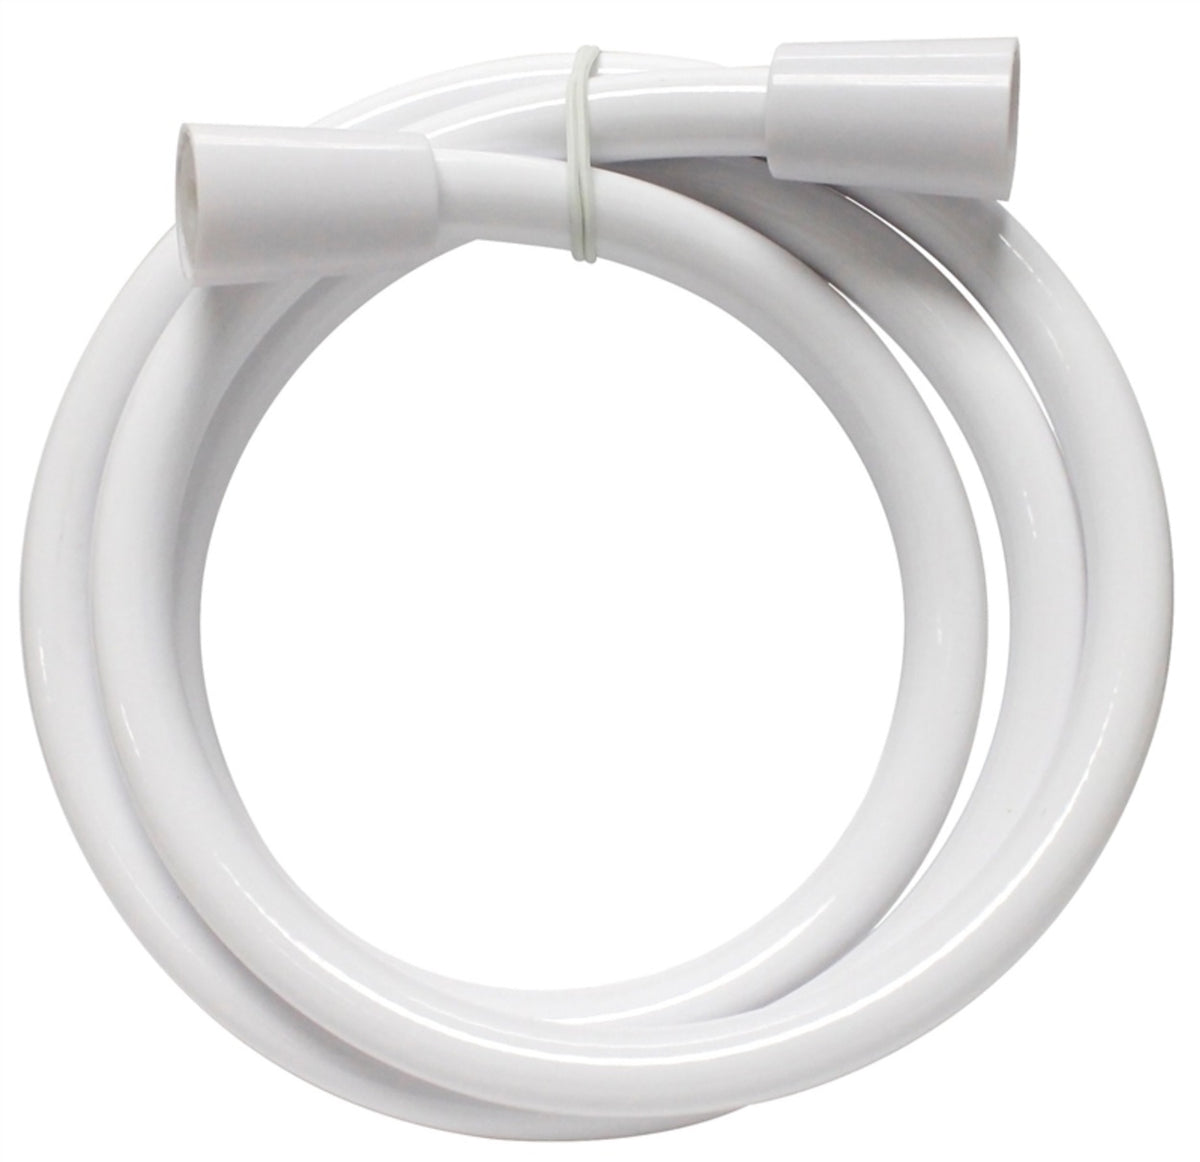 Plumb Pak PP825-42 Replacement Shower Hose, Chrome Plated